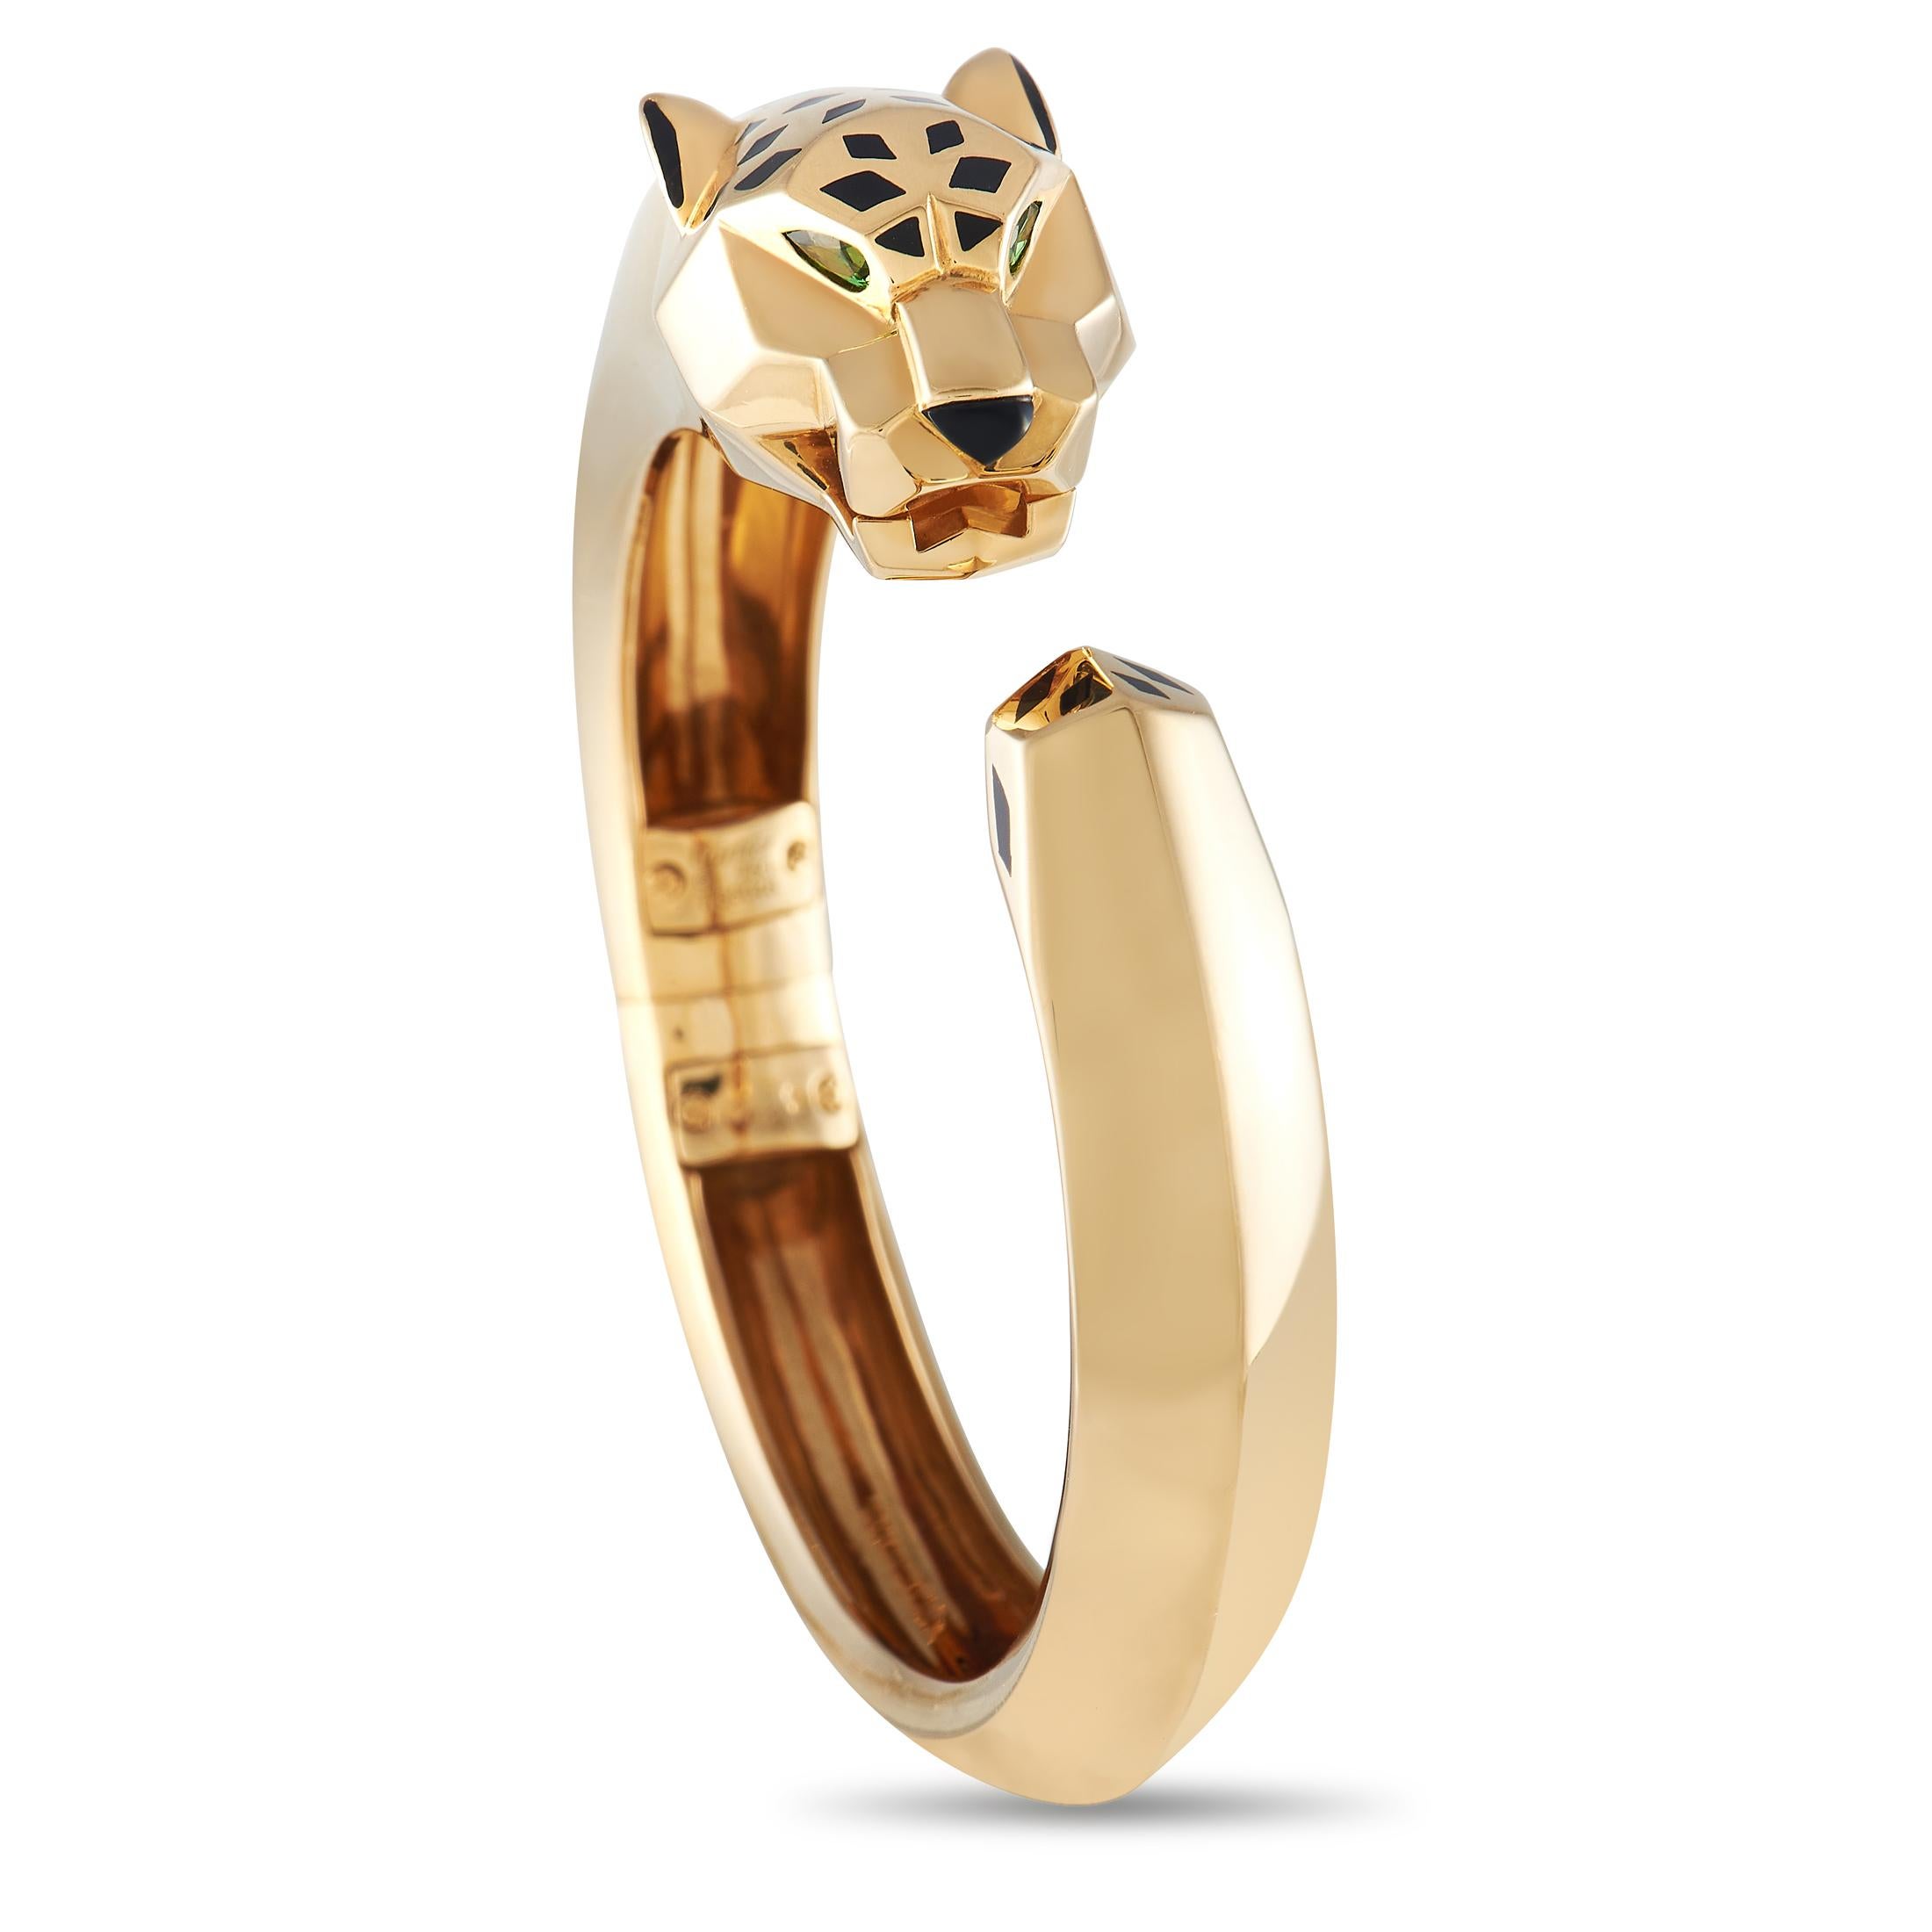 It doesn’t get any more captivating than this sleek, sophisticated Cartier Panthère de Cartier bracelet. Opulent 18K Yellow Gold highlights this piece’s clean lines and dramatic edges. Measuring 7.85” long, the brand’s iconic panther form is only